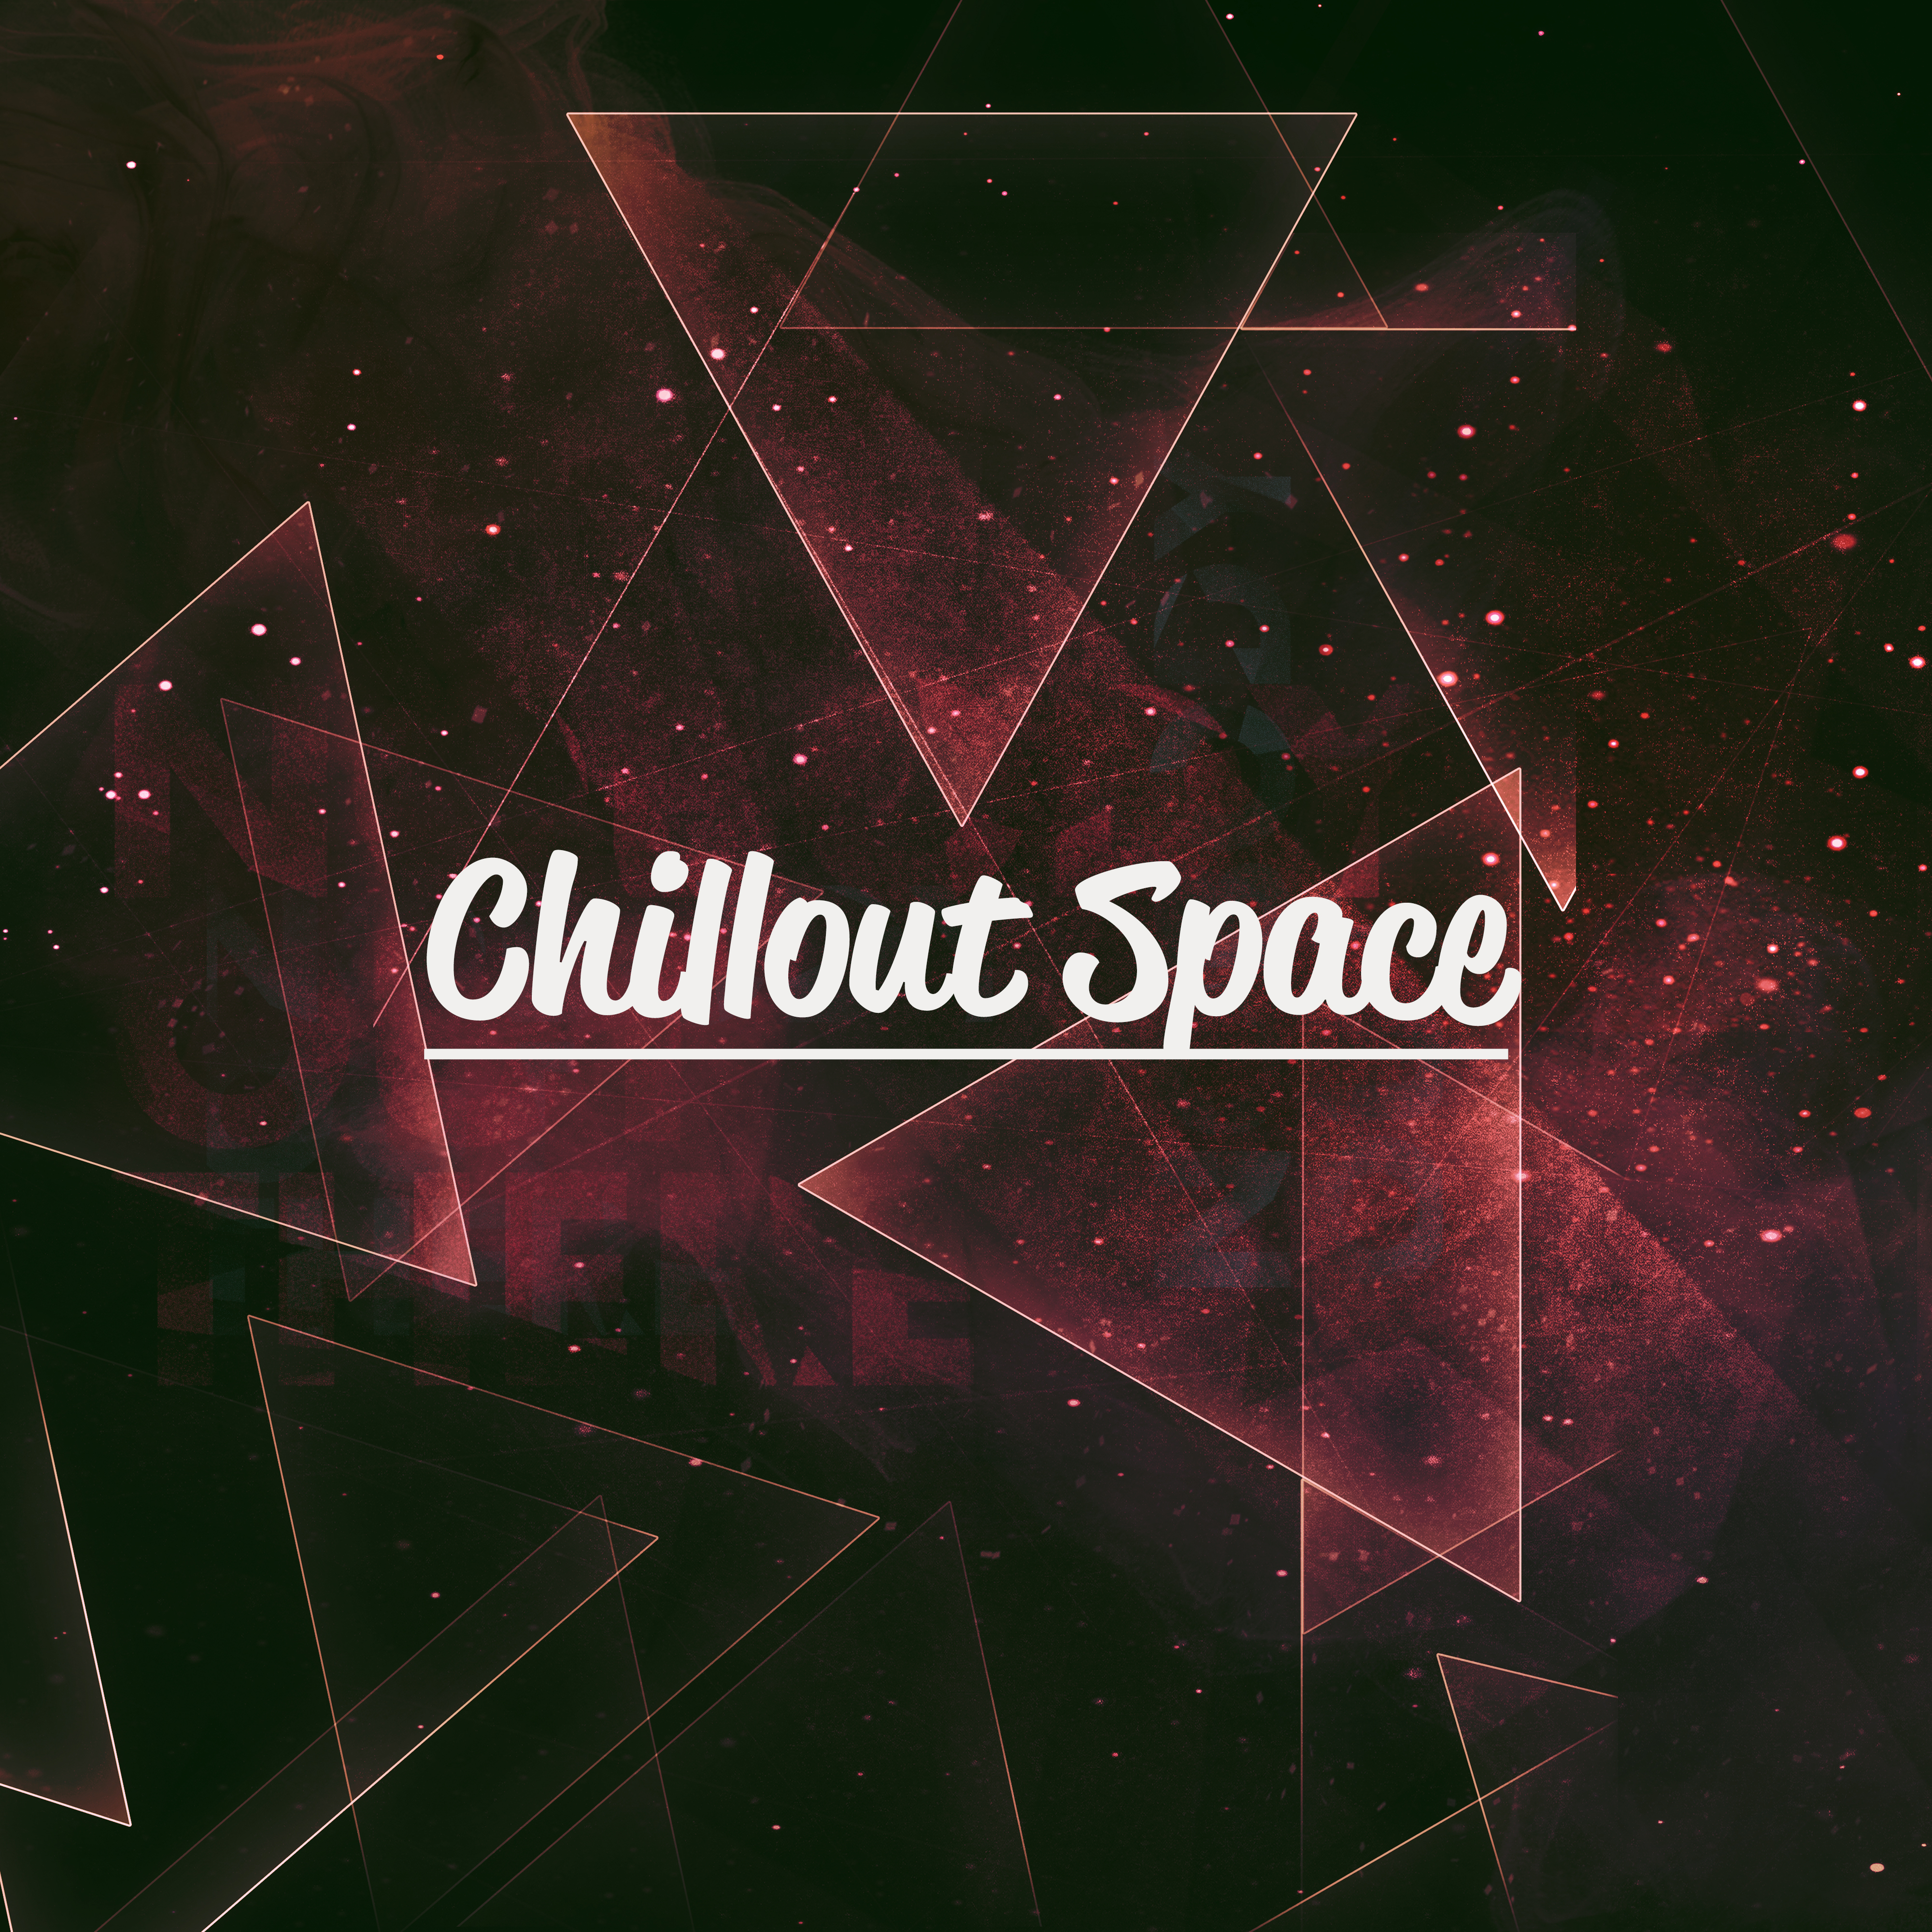 Chillout Space: Unusual Chillout Music with a Touch of Ambient Melodies and Gentle Electronic Sounds